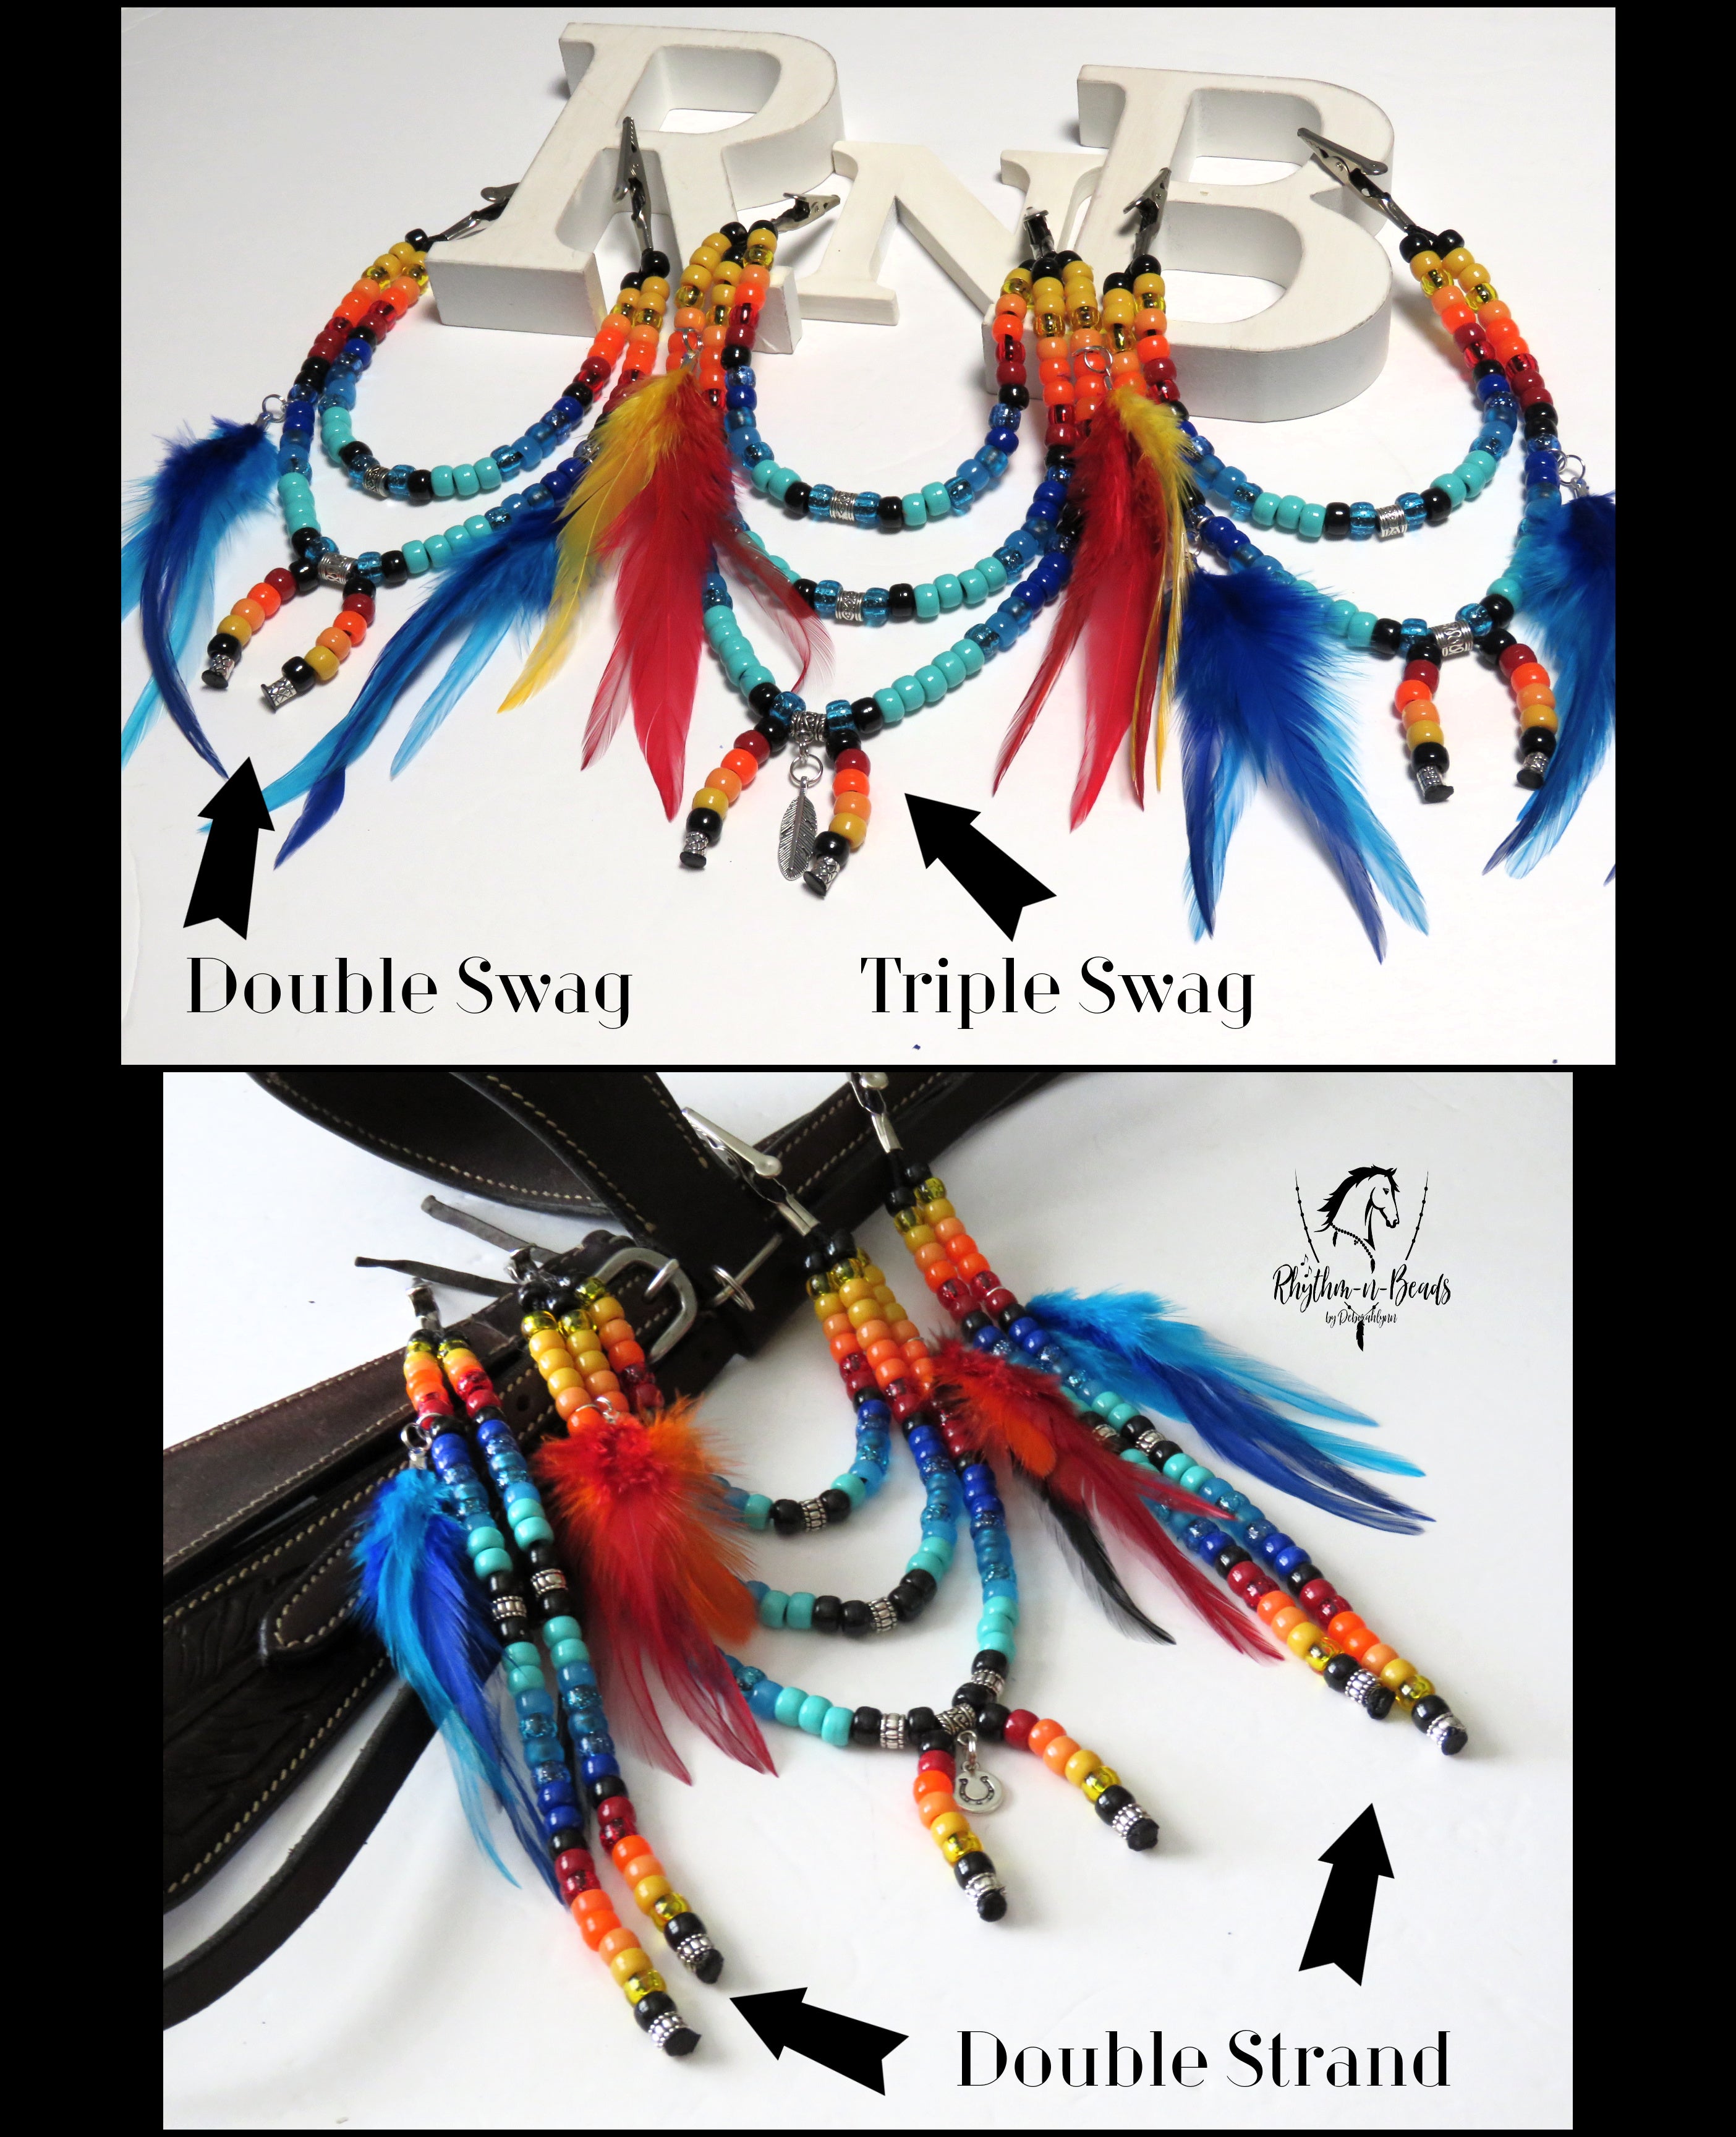 CUSTOM Mane Beads -Mane Mantle-Mix & Match - Pick your own colours